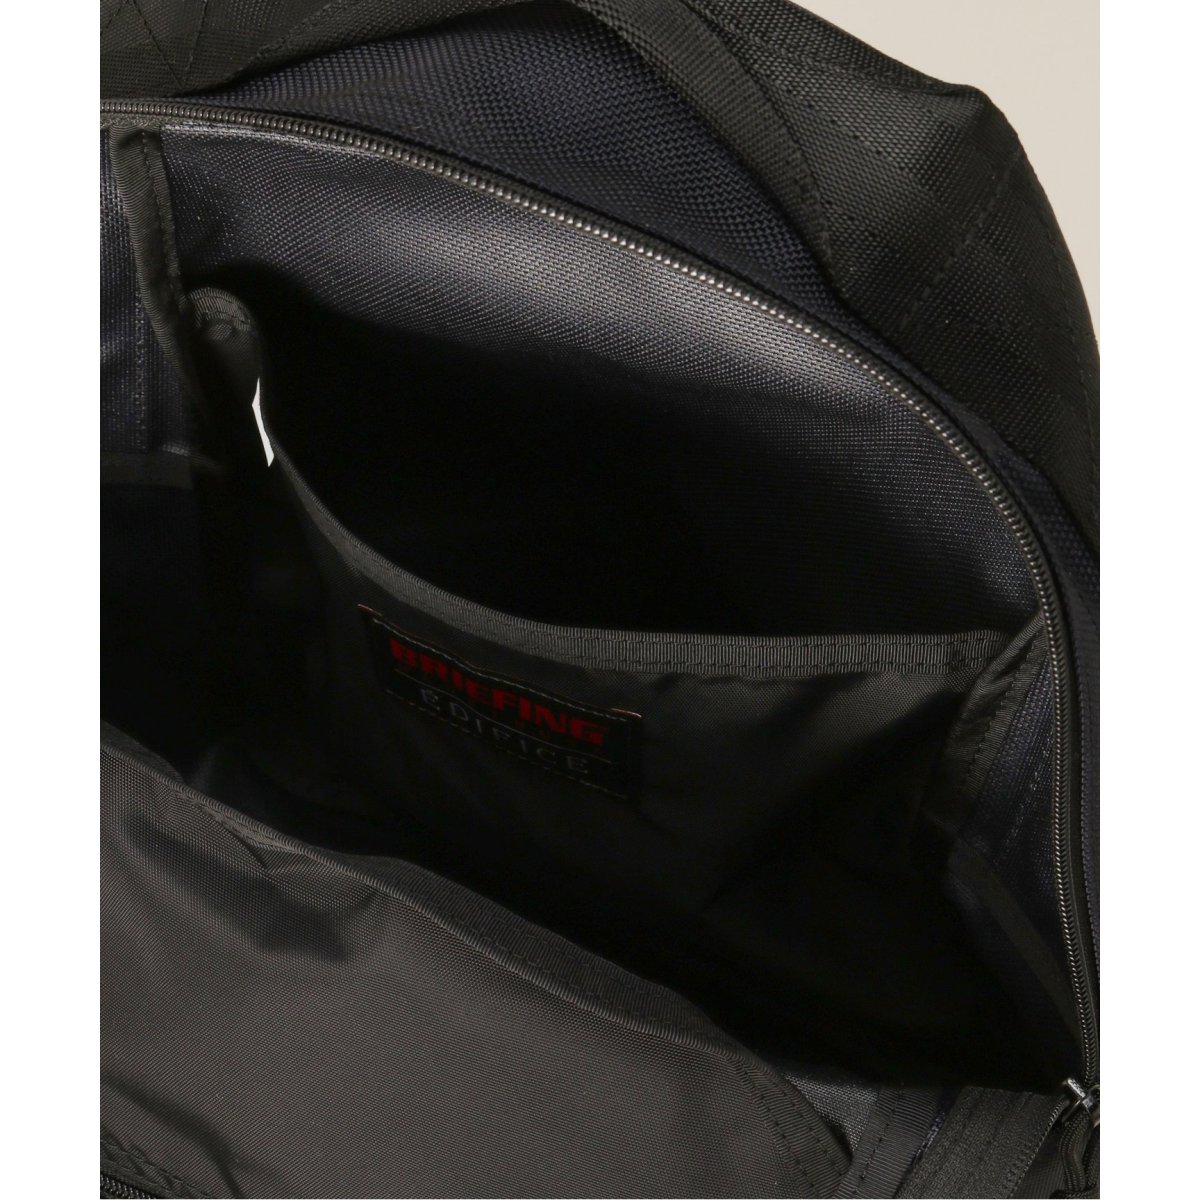 BRIEFING/ブリーフィング】別注 DEEP SEA attack DAYPACK 